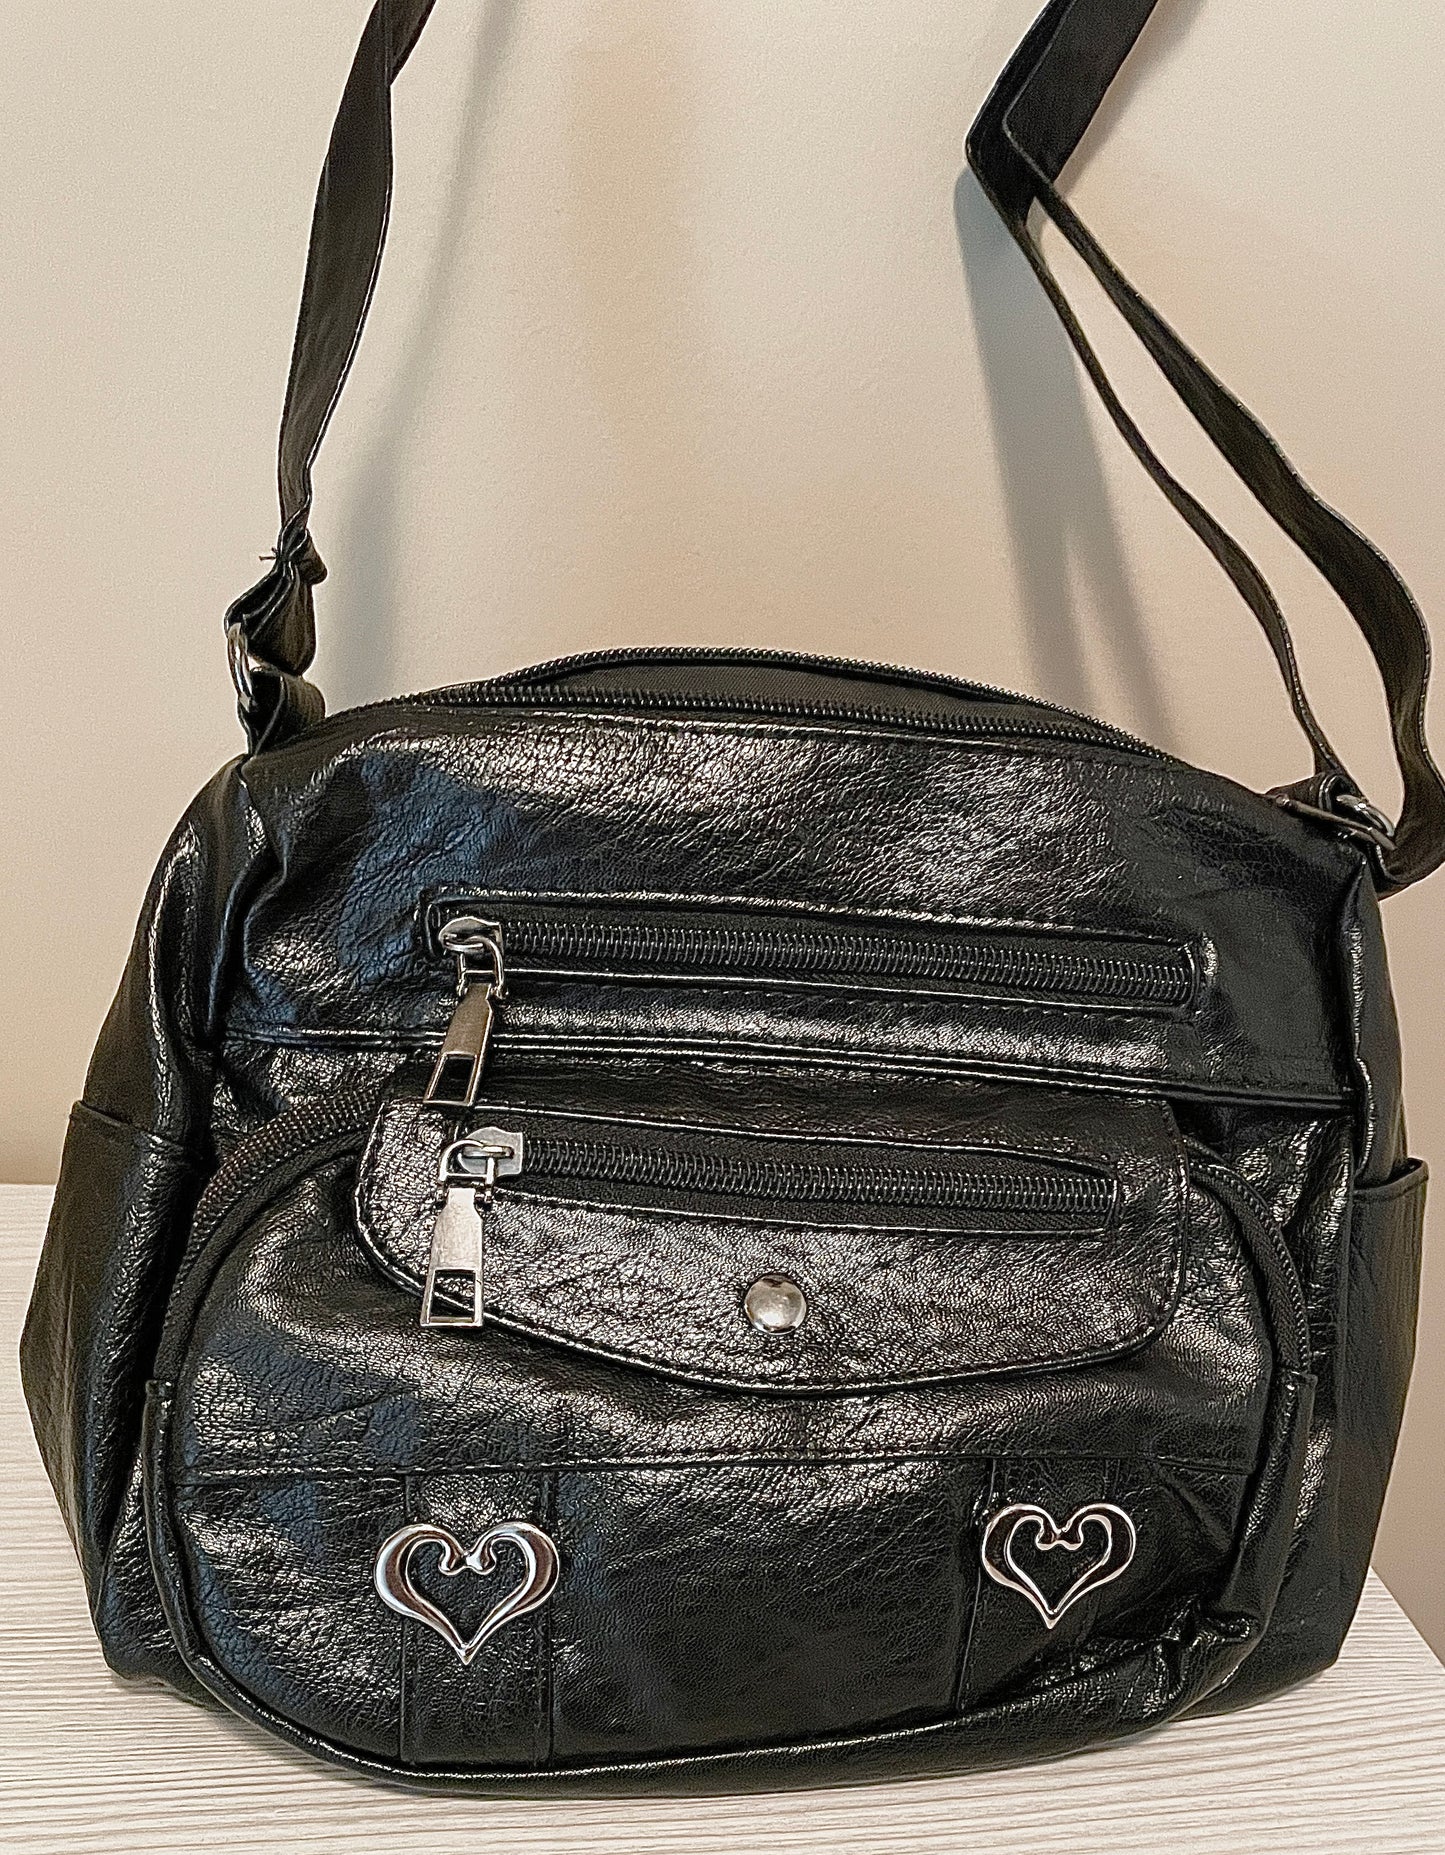 Purse with heart design